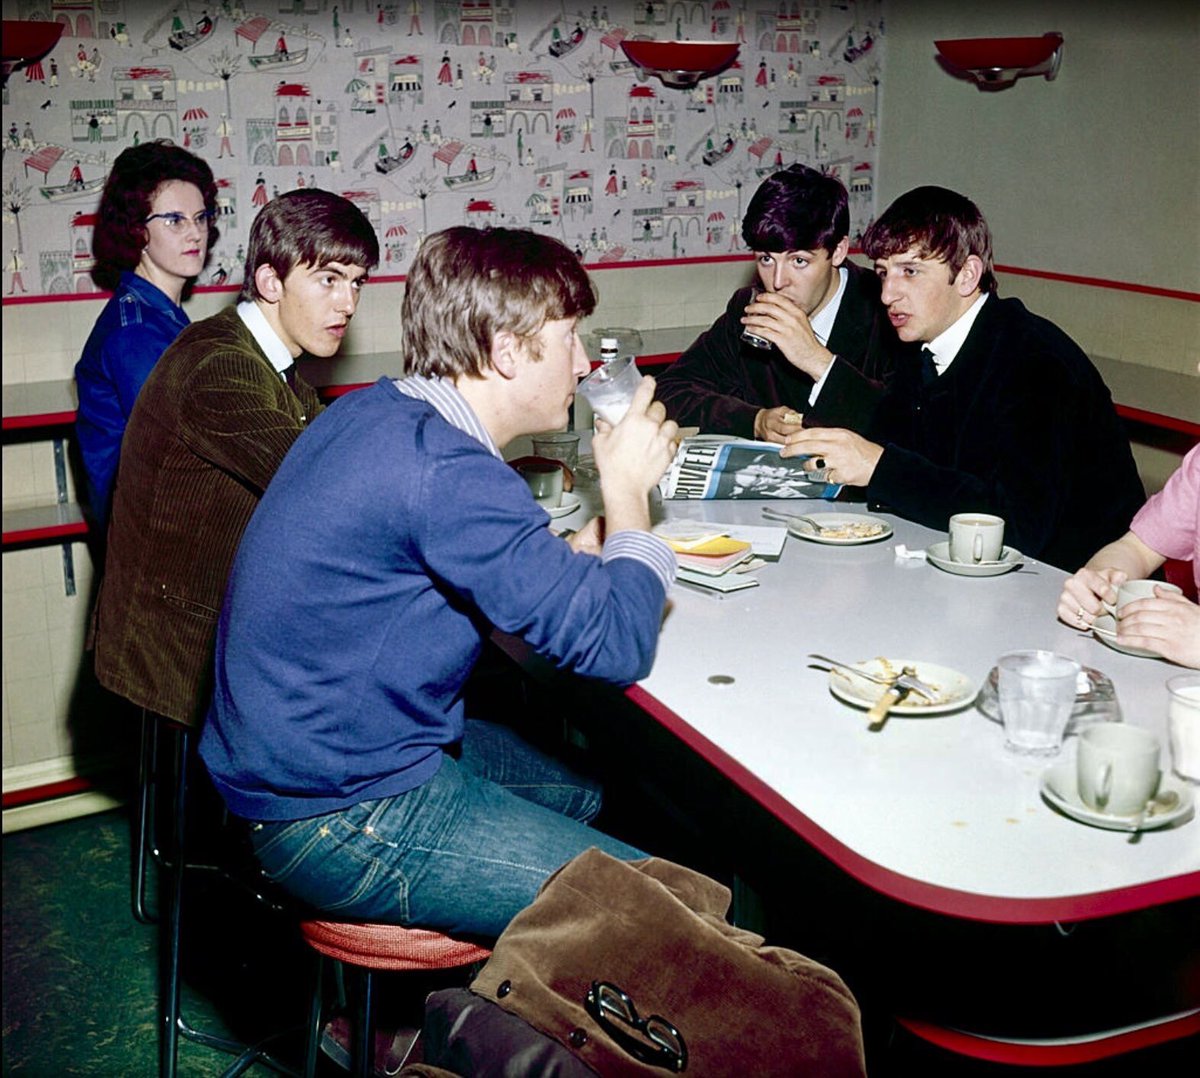 Cafeteria break at the Playhouse Theatre, London, May 1963. Love the wallpaper! #TheBeatles #London #1960s #PlayhouseTheatre #sixties #sixtieslondon #sixtiesmusic #sixtiesstyle #privateeye